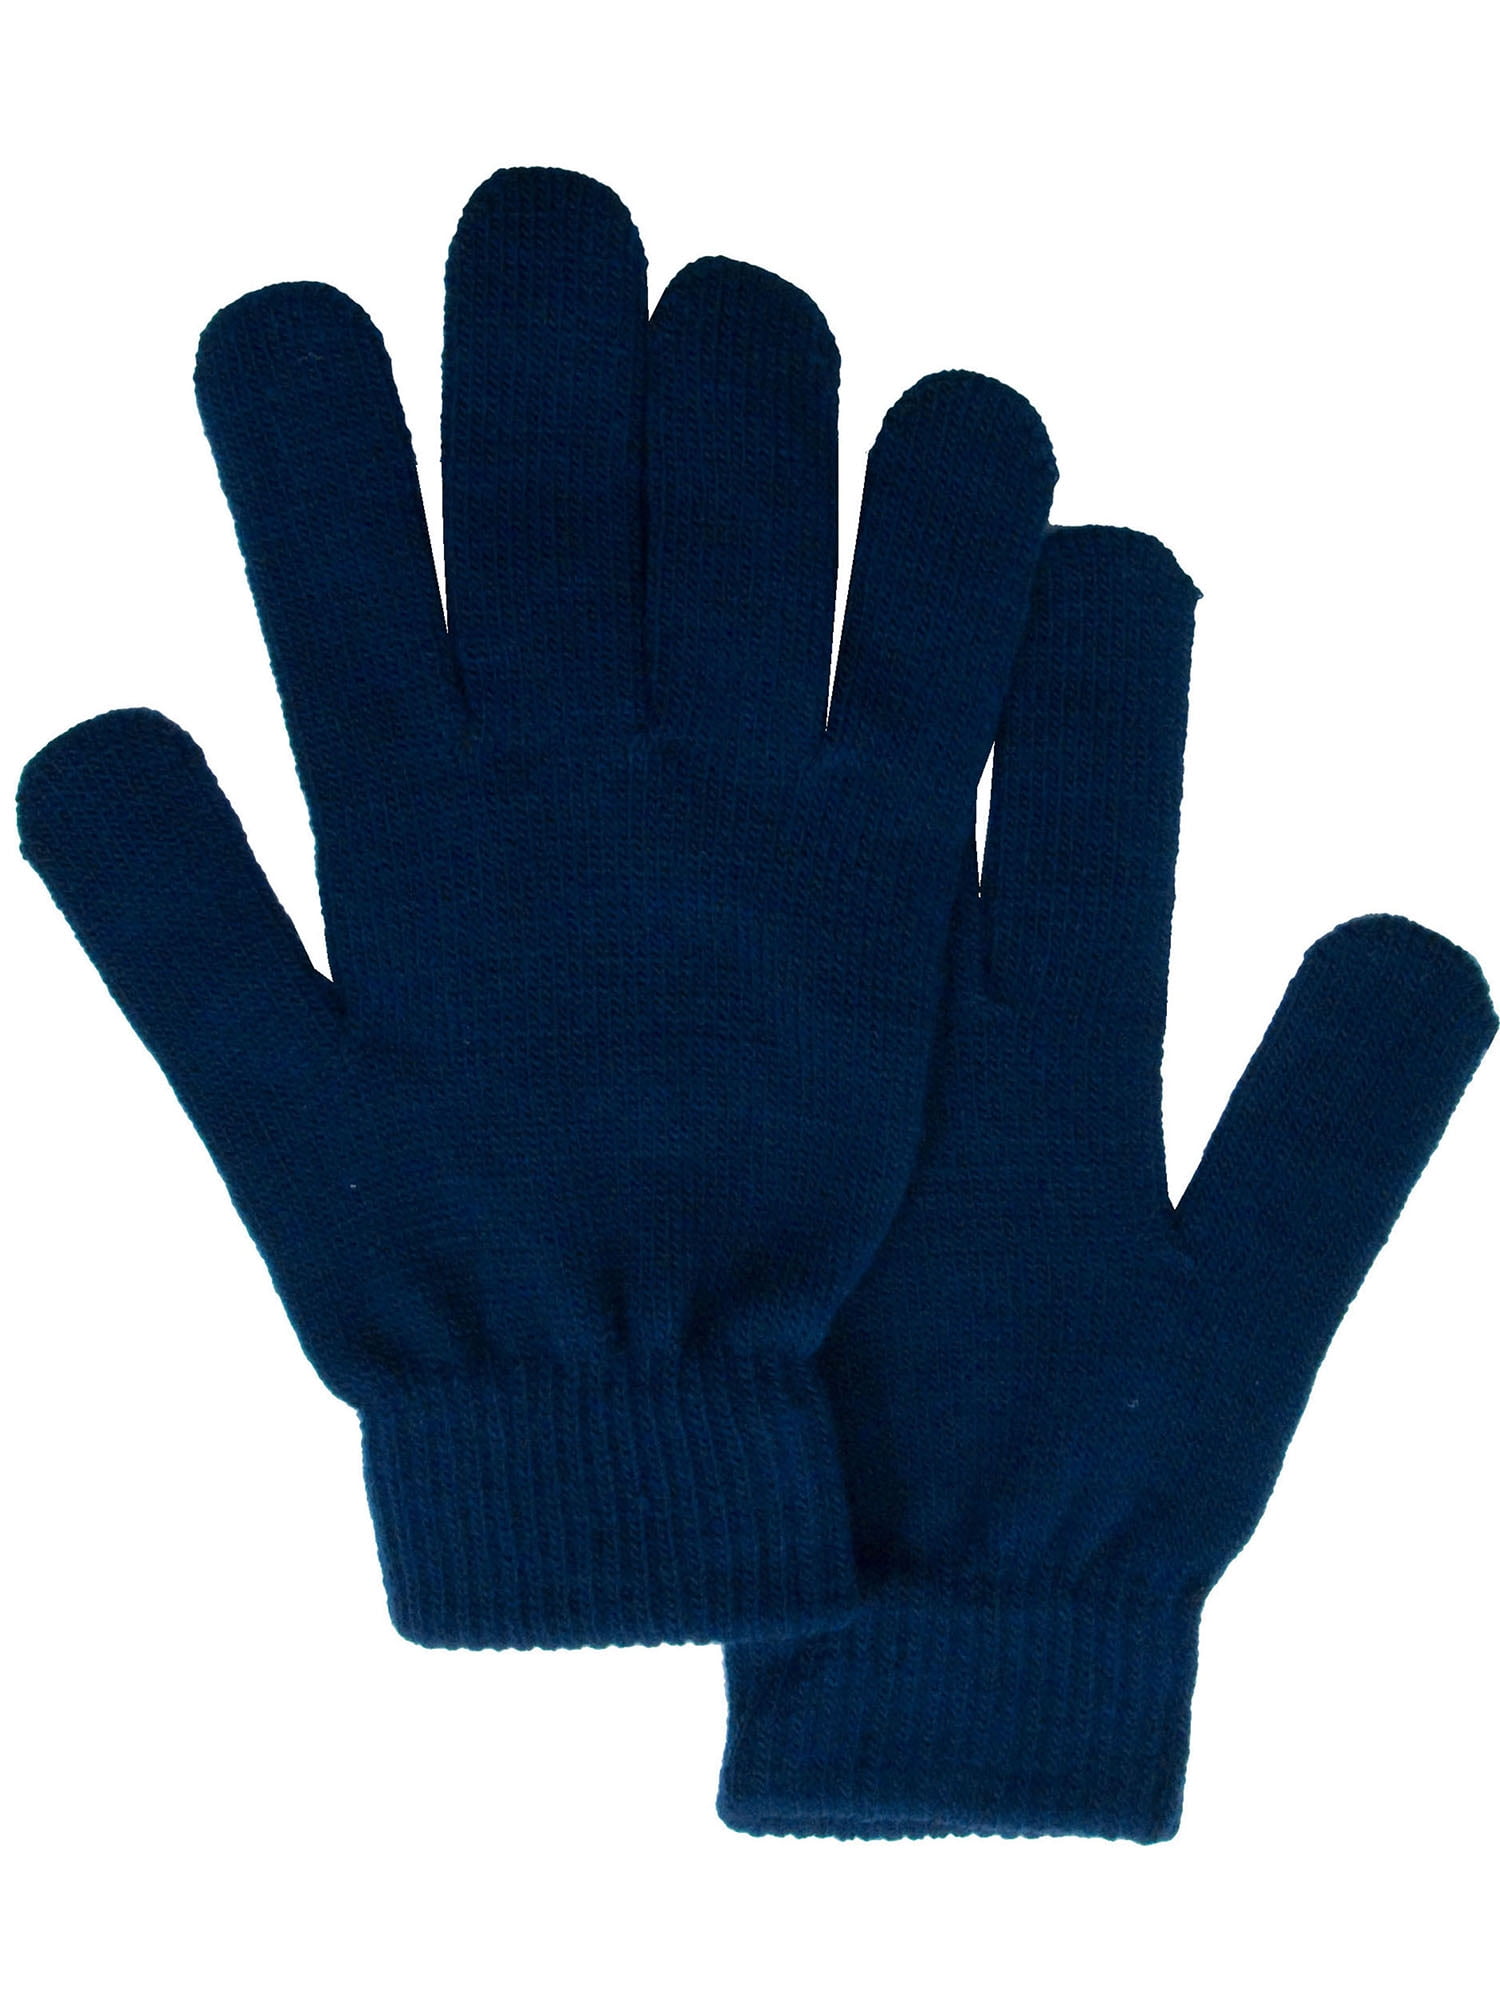 New Gloves Women's Magic Knit Adult Warm Winter Gloves Great Colors 